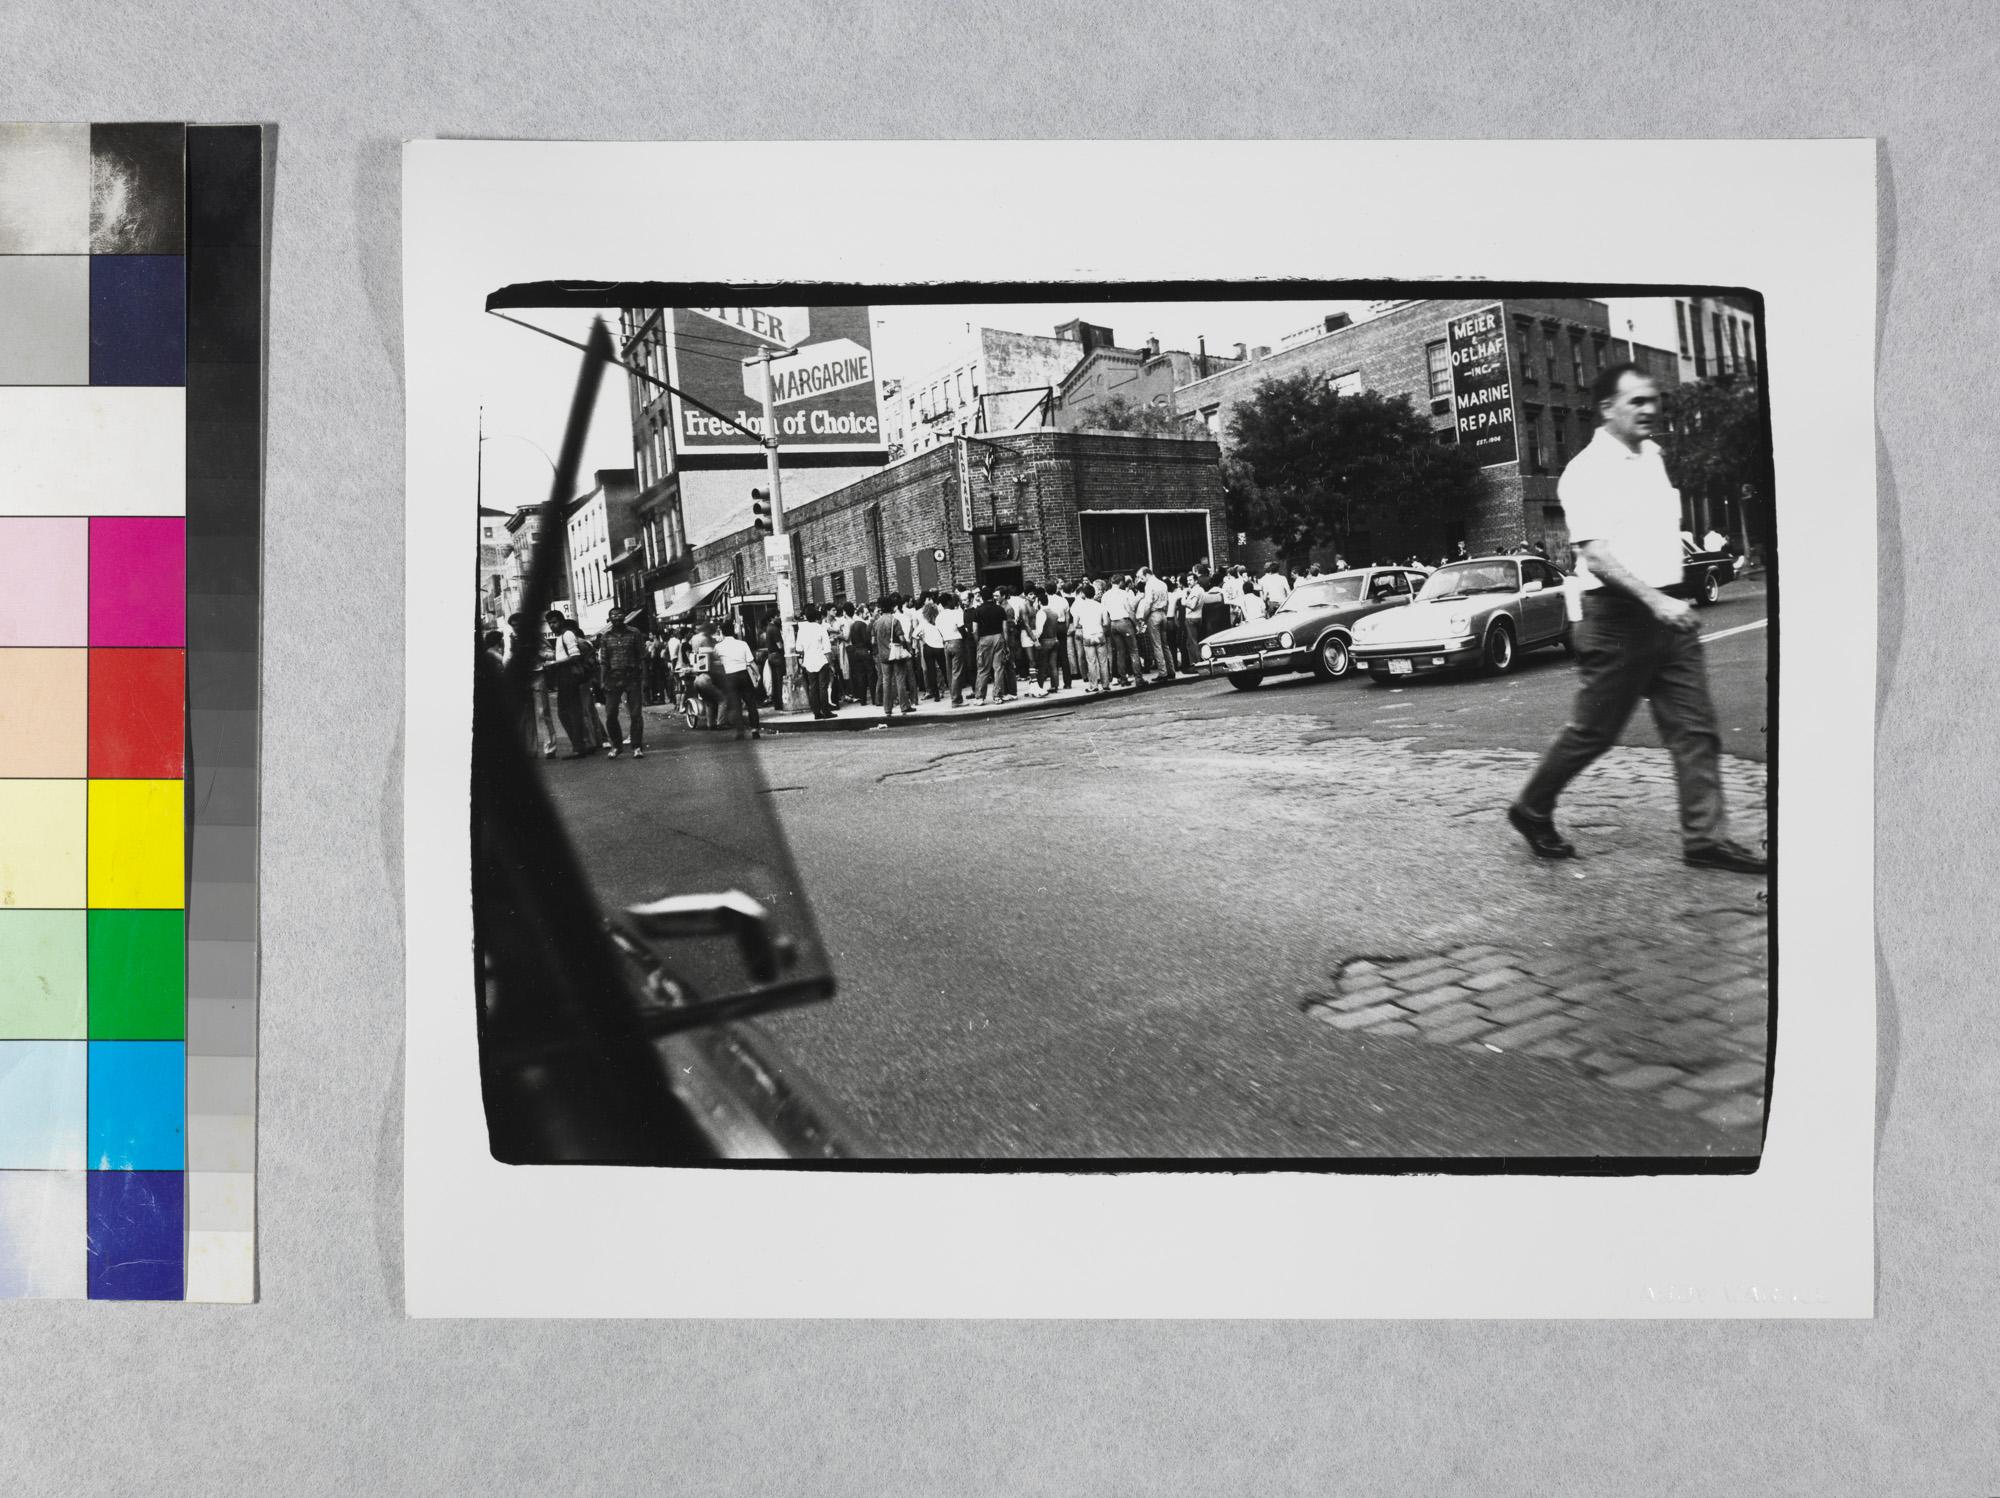 Gelatin silver print of People on the Street at Ramrod Bar in NYC by Andy Warhol For Sale 2